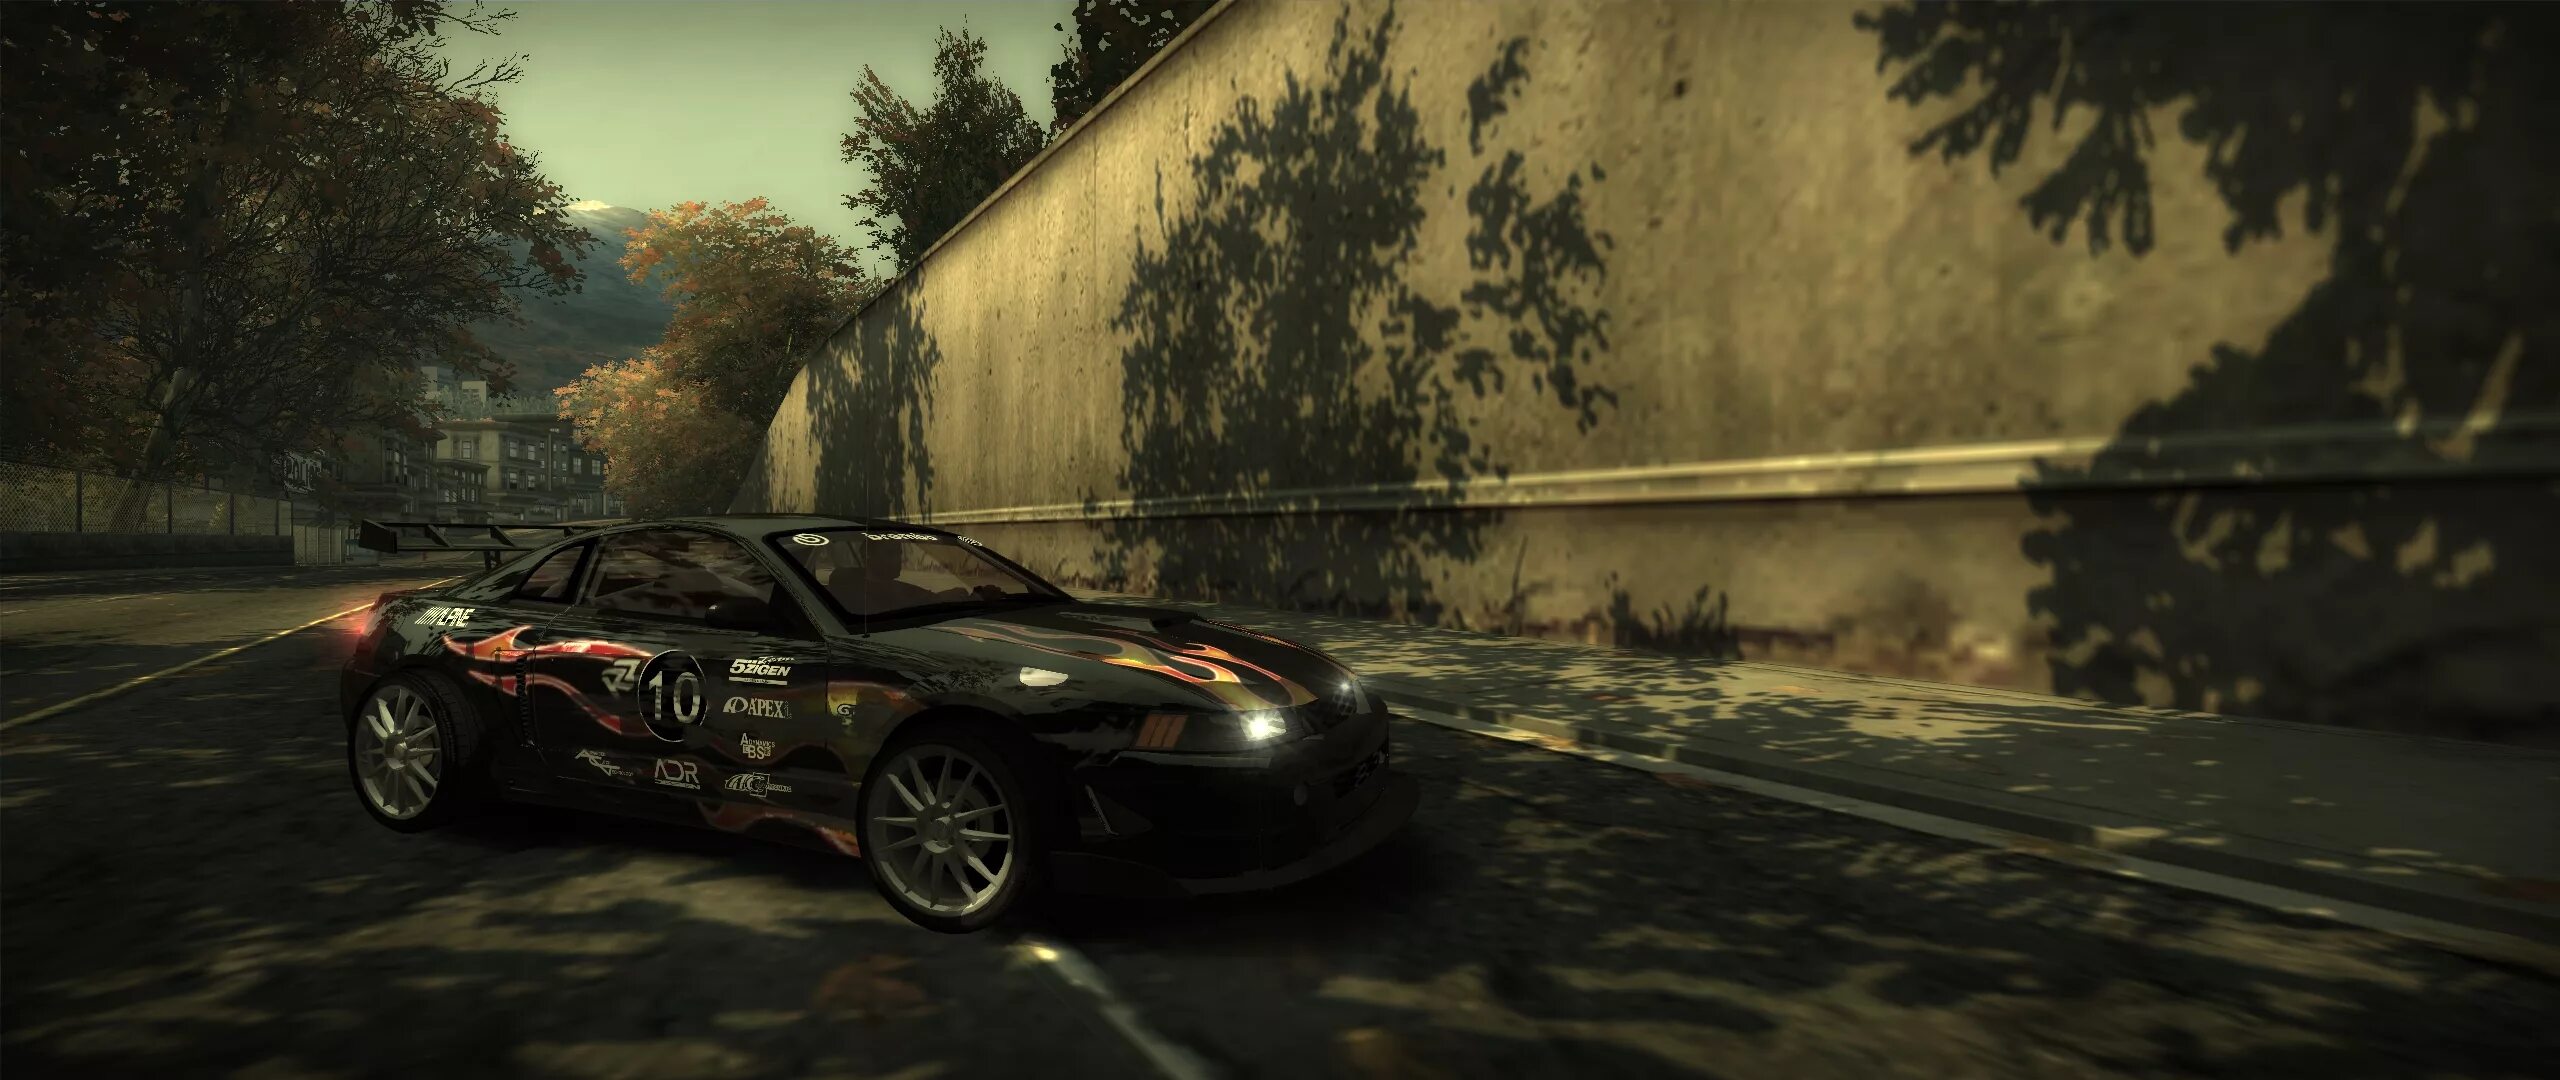 Nfs mw сохранения. Need for Speed most wanted Мустанг. Нфс мост вантед 2005. Из need for Speed most wanted 2005. Мост вантед 350z.